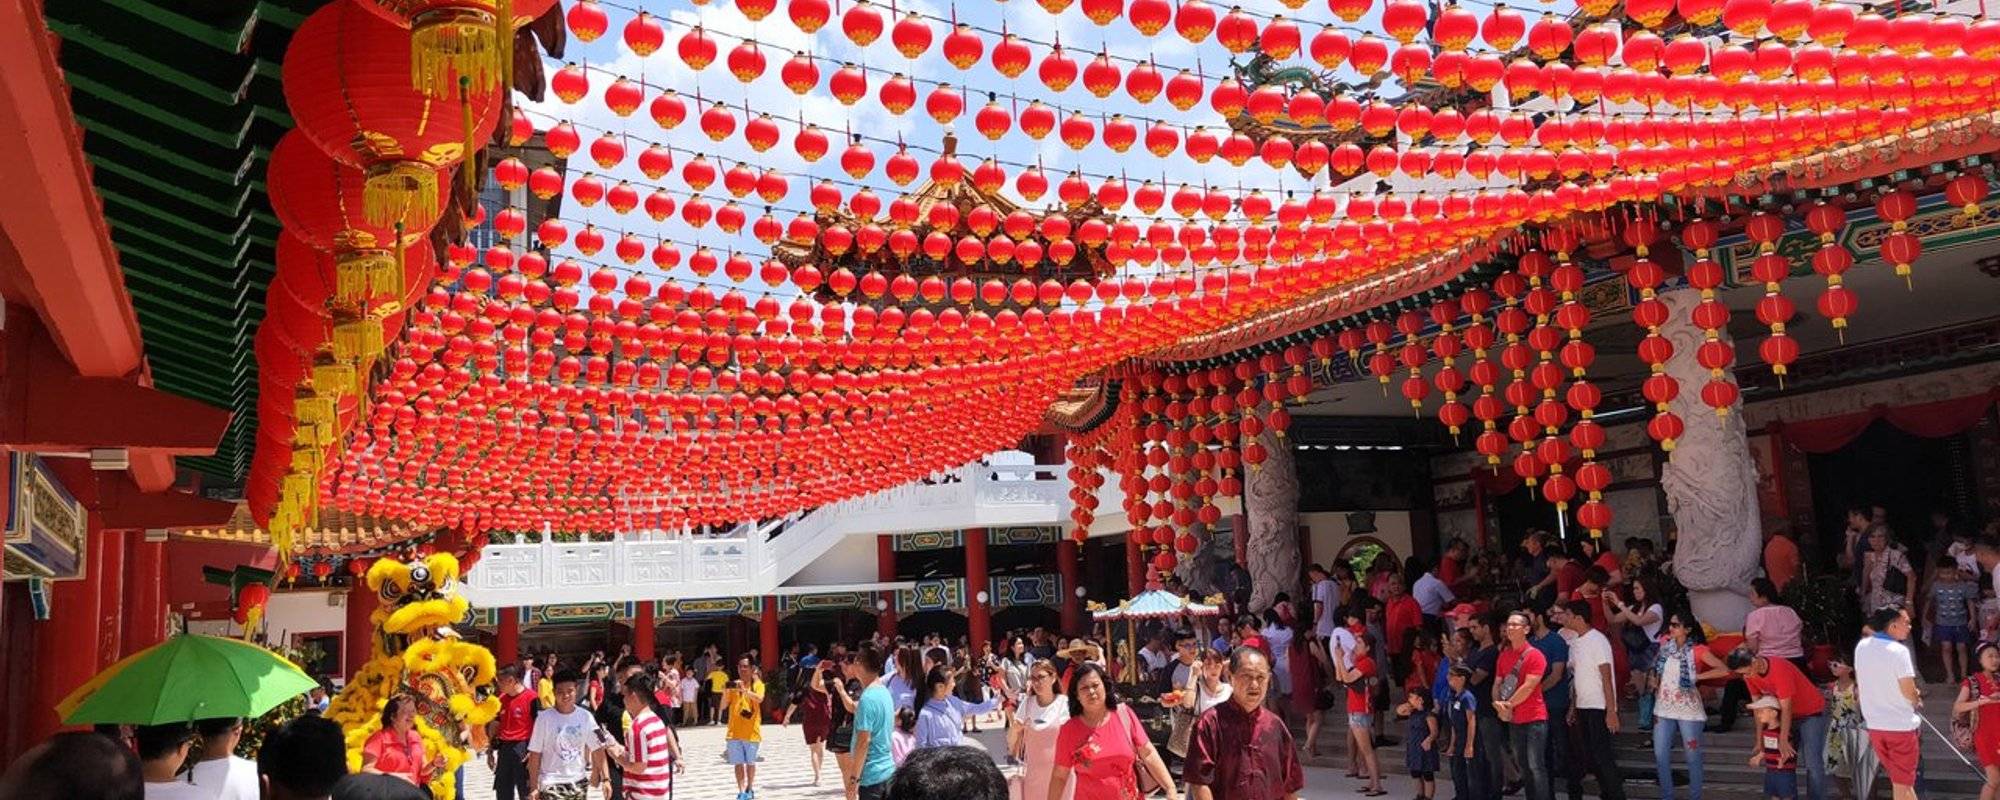 Chinese New Year events @ KL Thean Hou Temple (吉隆坡天后宫新春活动)